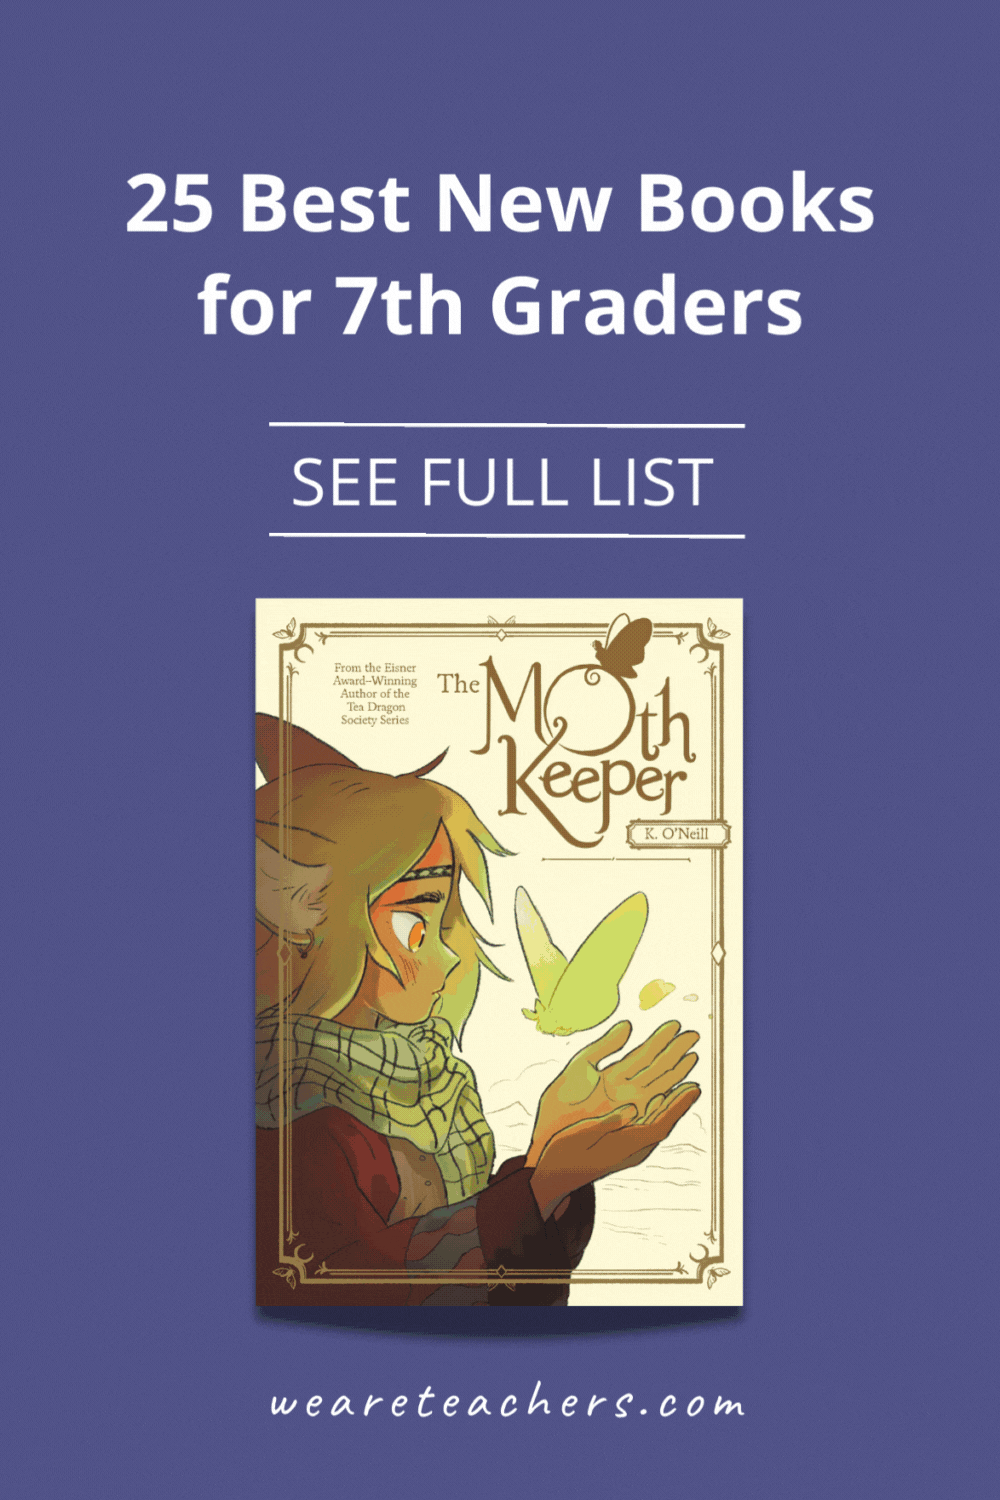 Looking for books for 7th graders? Look no further! Check out our teacher and kid approved list of titles that are sure to hook your readers.